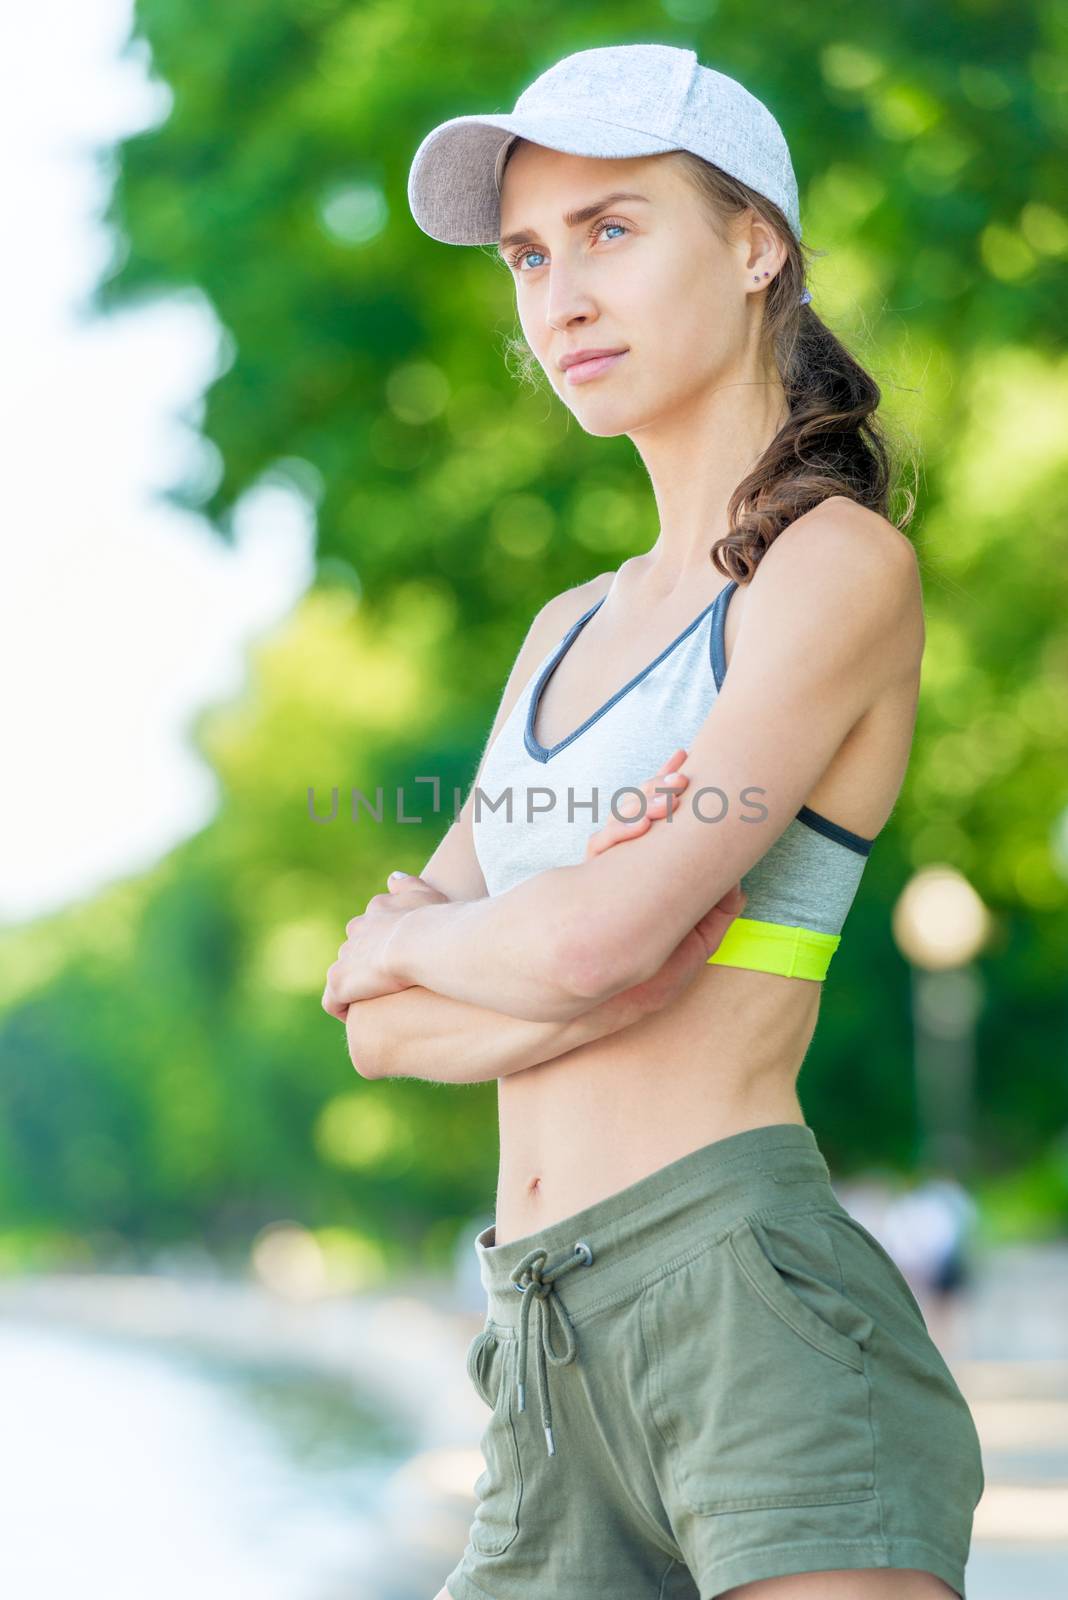 Vertical close-up portrait of a happy athletic girl who poses on by kosmsos111